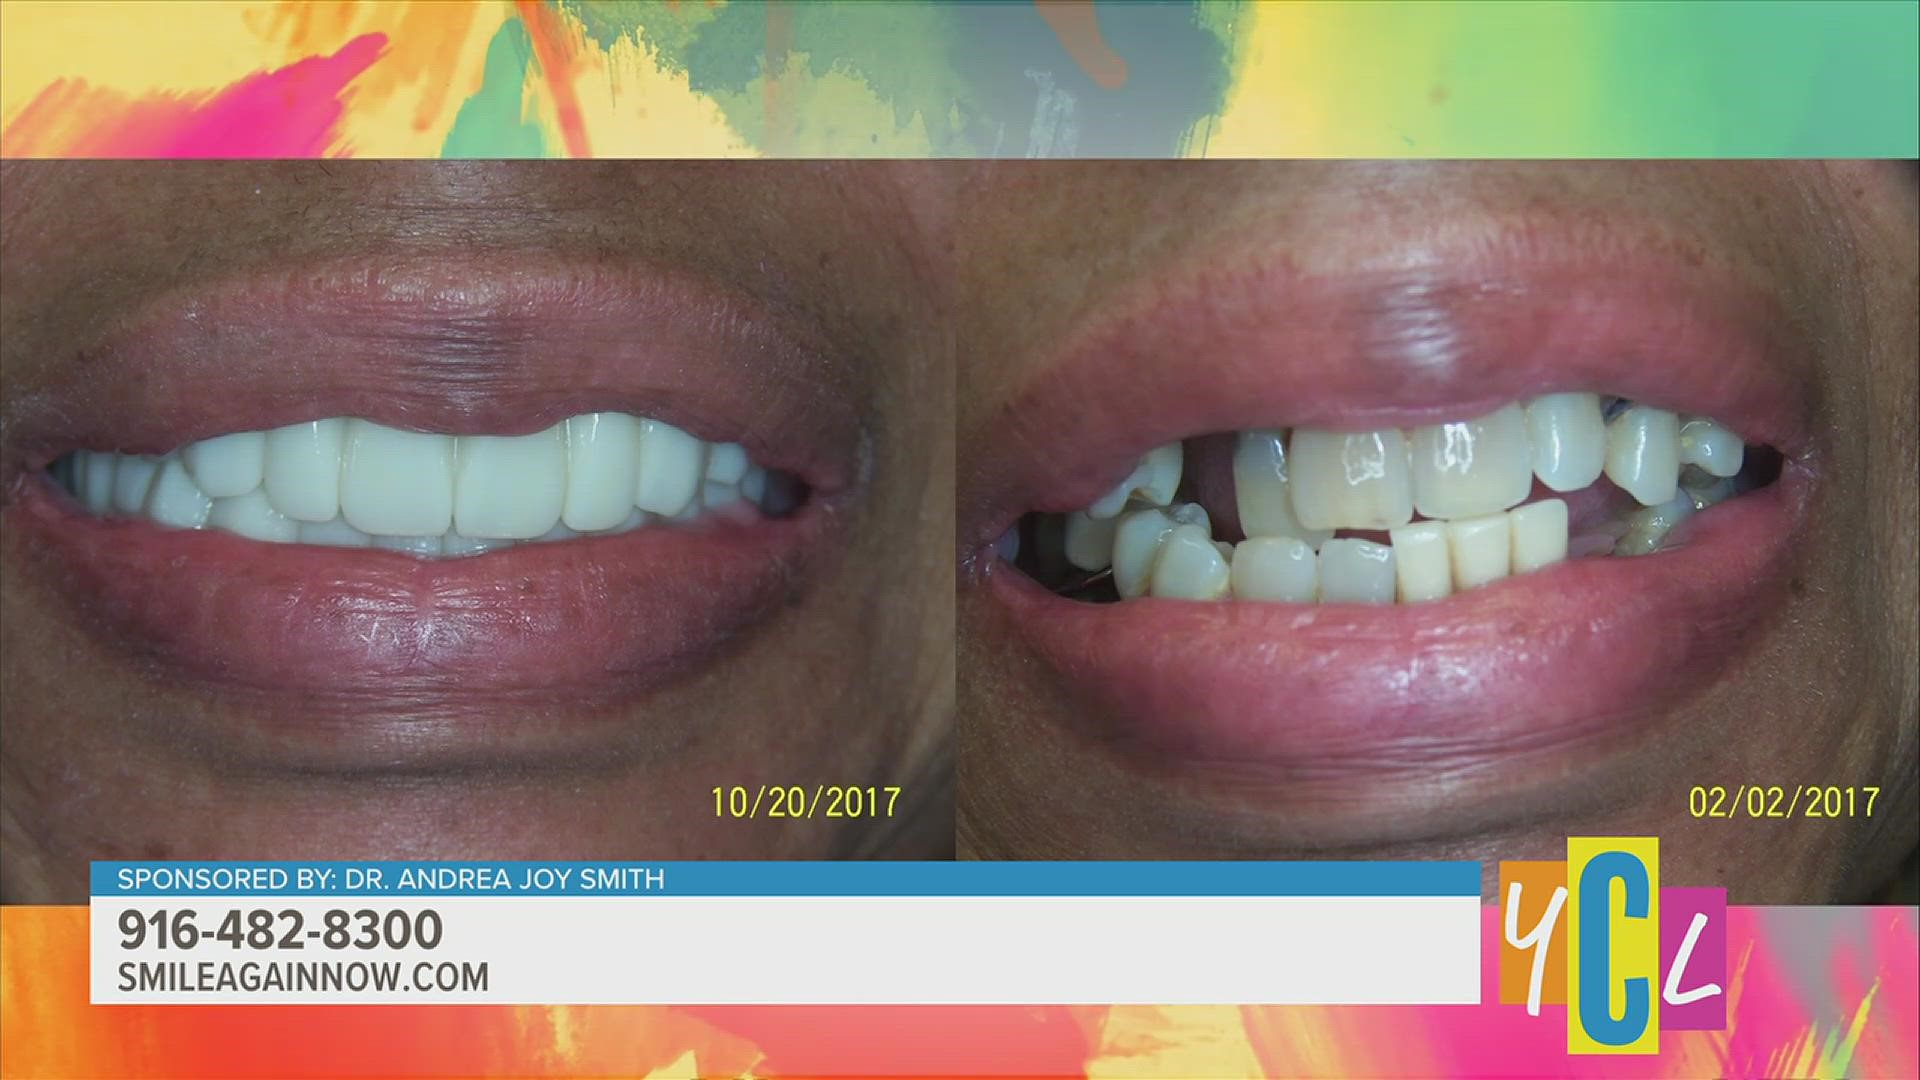 Dr. Andrea Joy Smith is helping her patients smile again with mini dental implants. This segment is paid by Dr. Andrea Joy Smith.